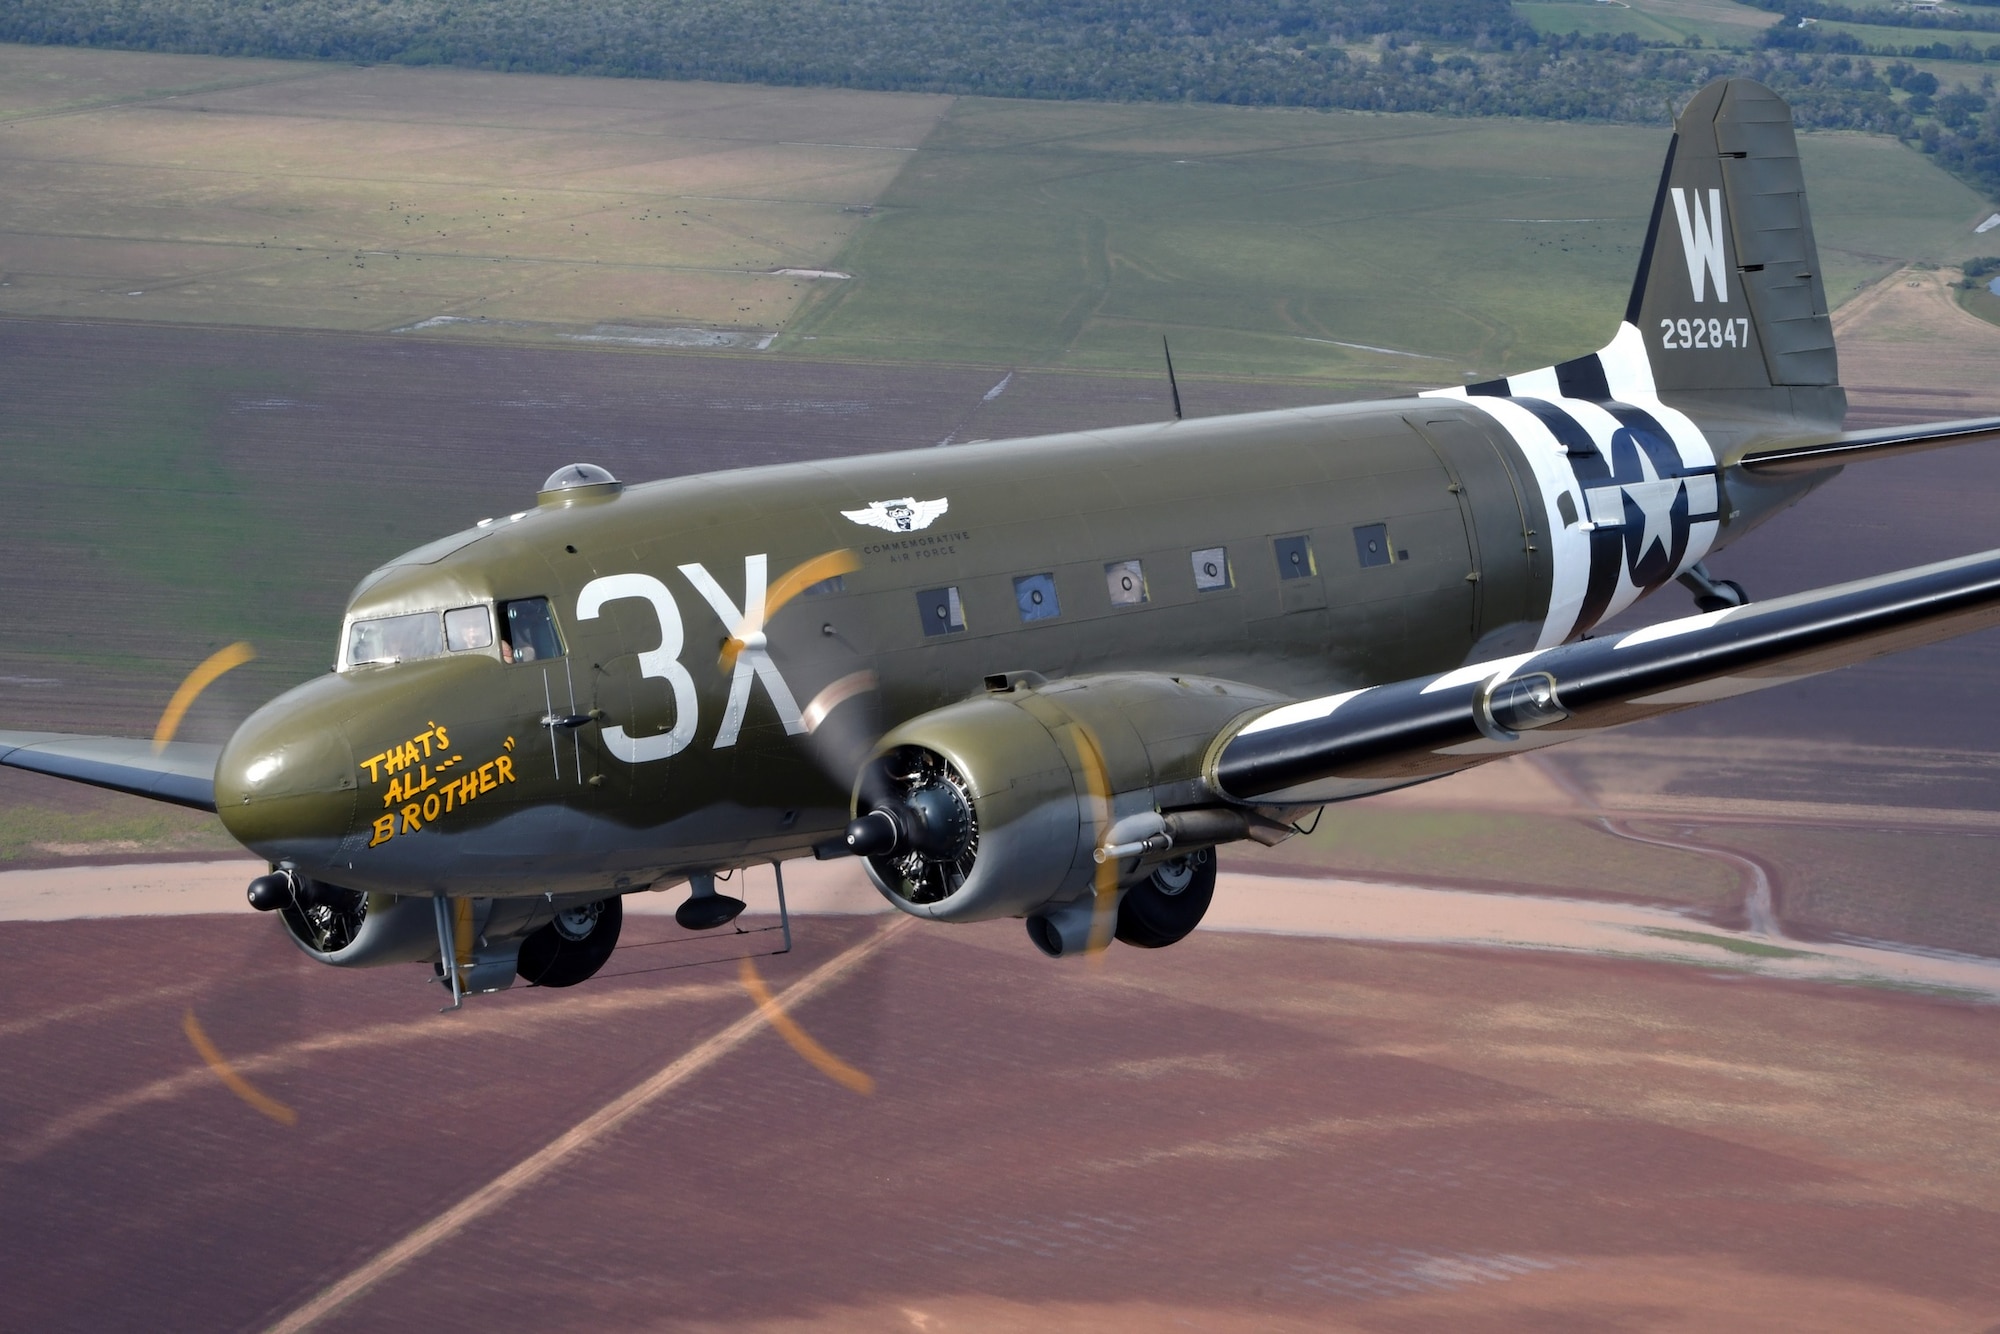 Aerial picture of the C-47 "That's All, Brother" flying.